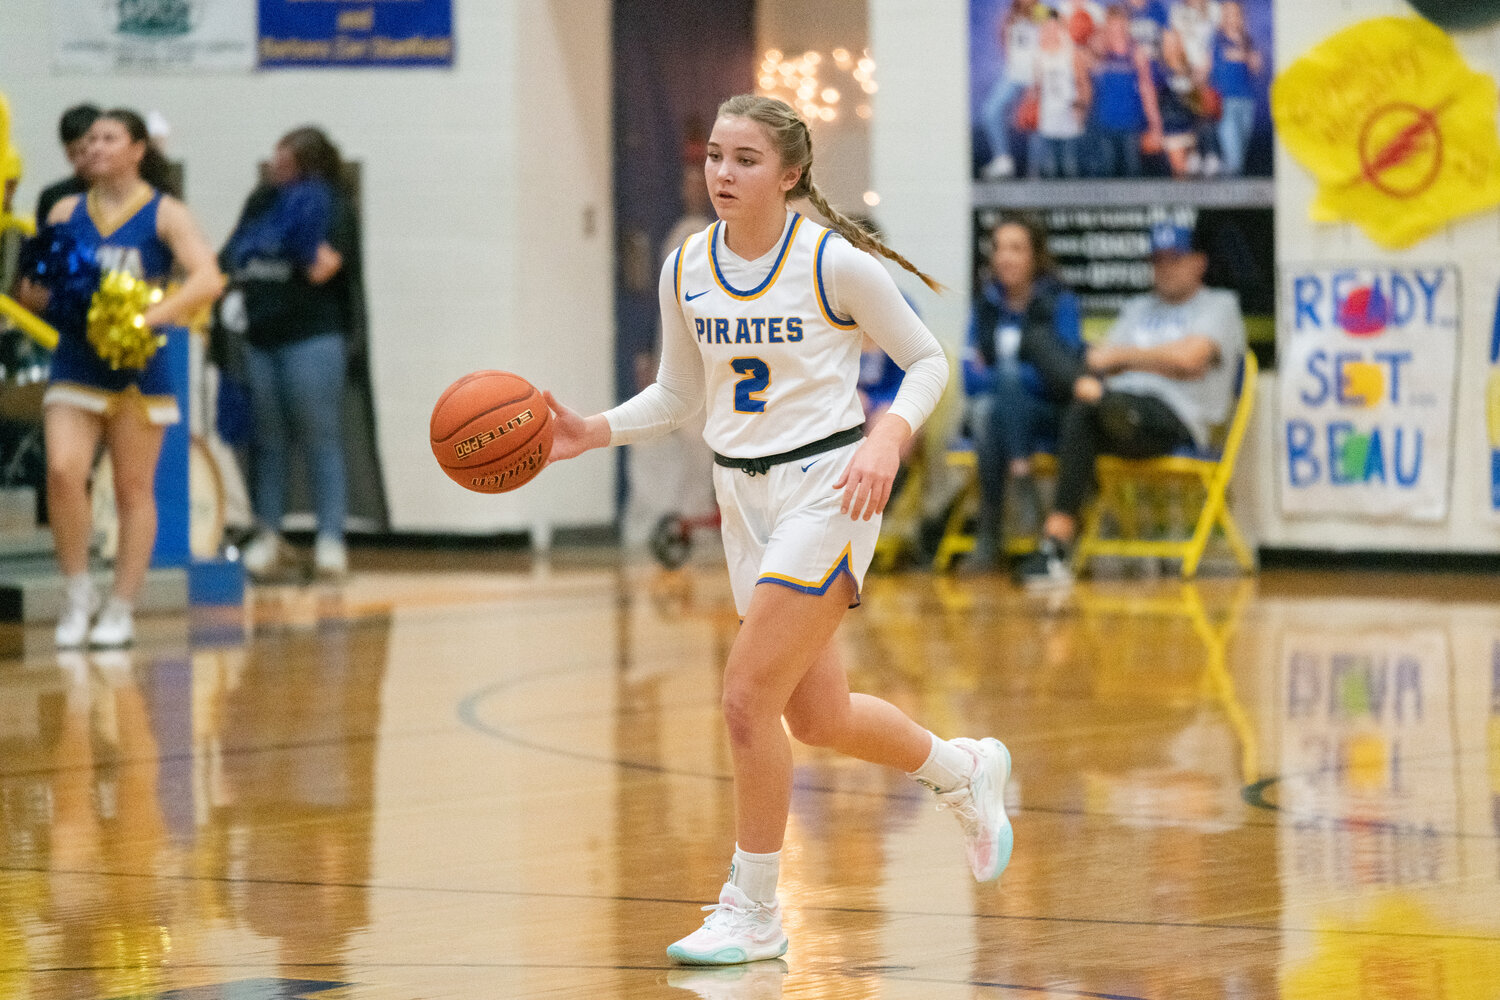 Danika Hallom dribbles up the court during the first half of Adna's 52-49 loss to Rainier on Dec. 8.